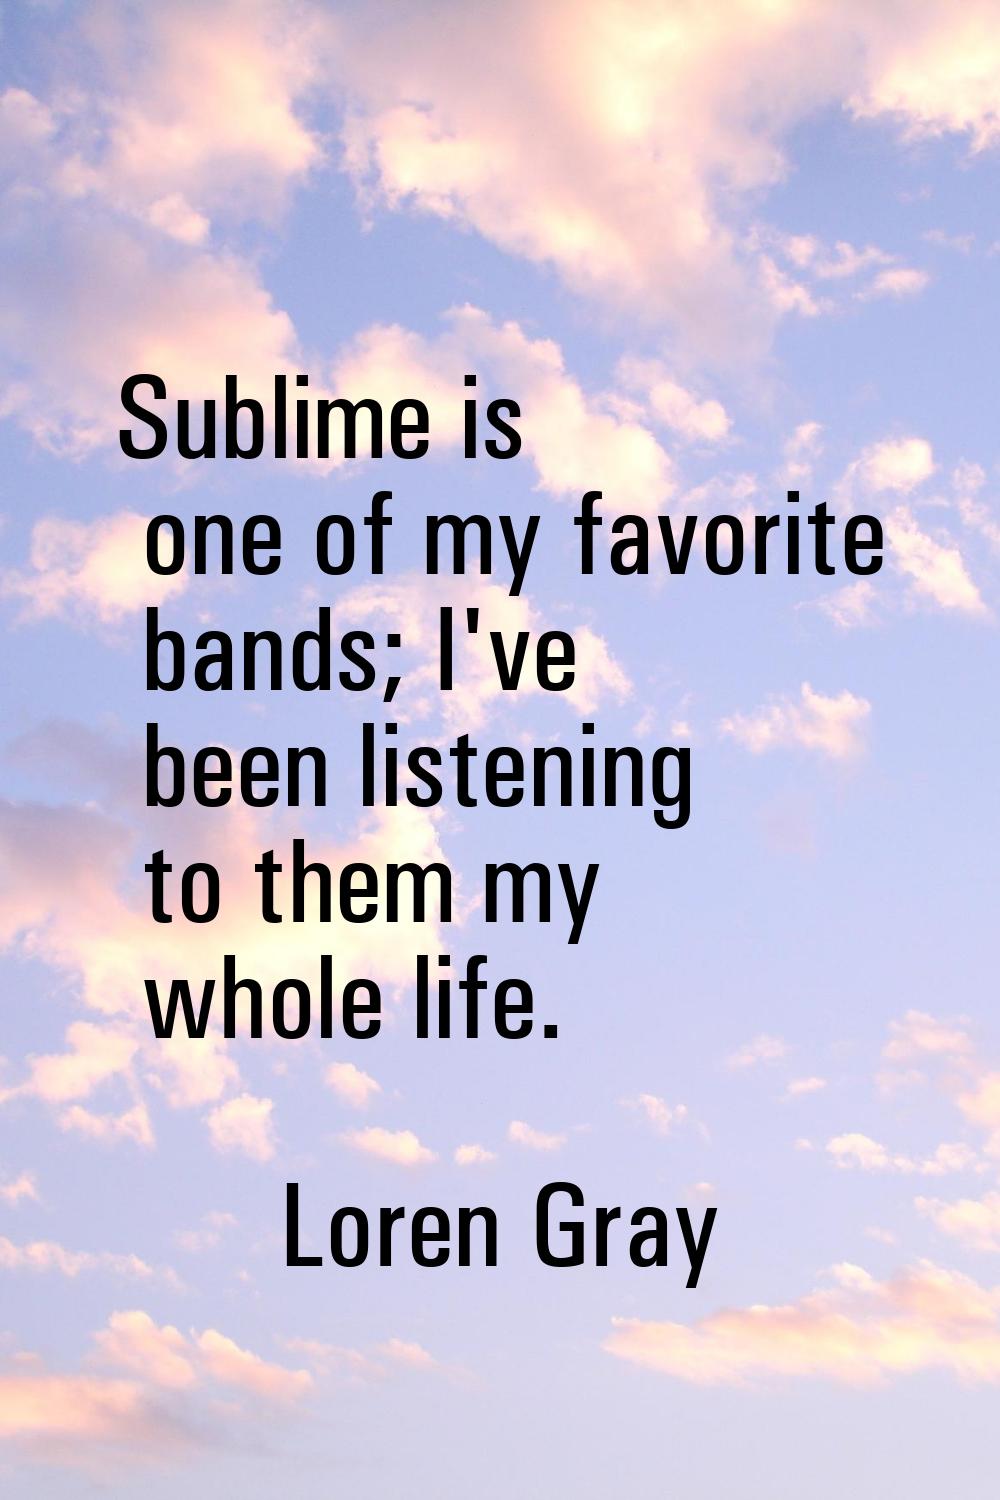 Sublime is one of my favorite bands; I've been listening to them my whole life.